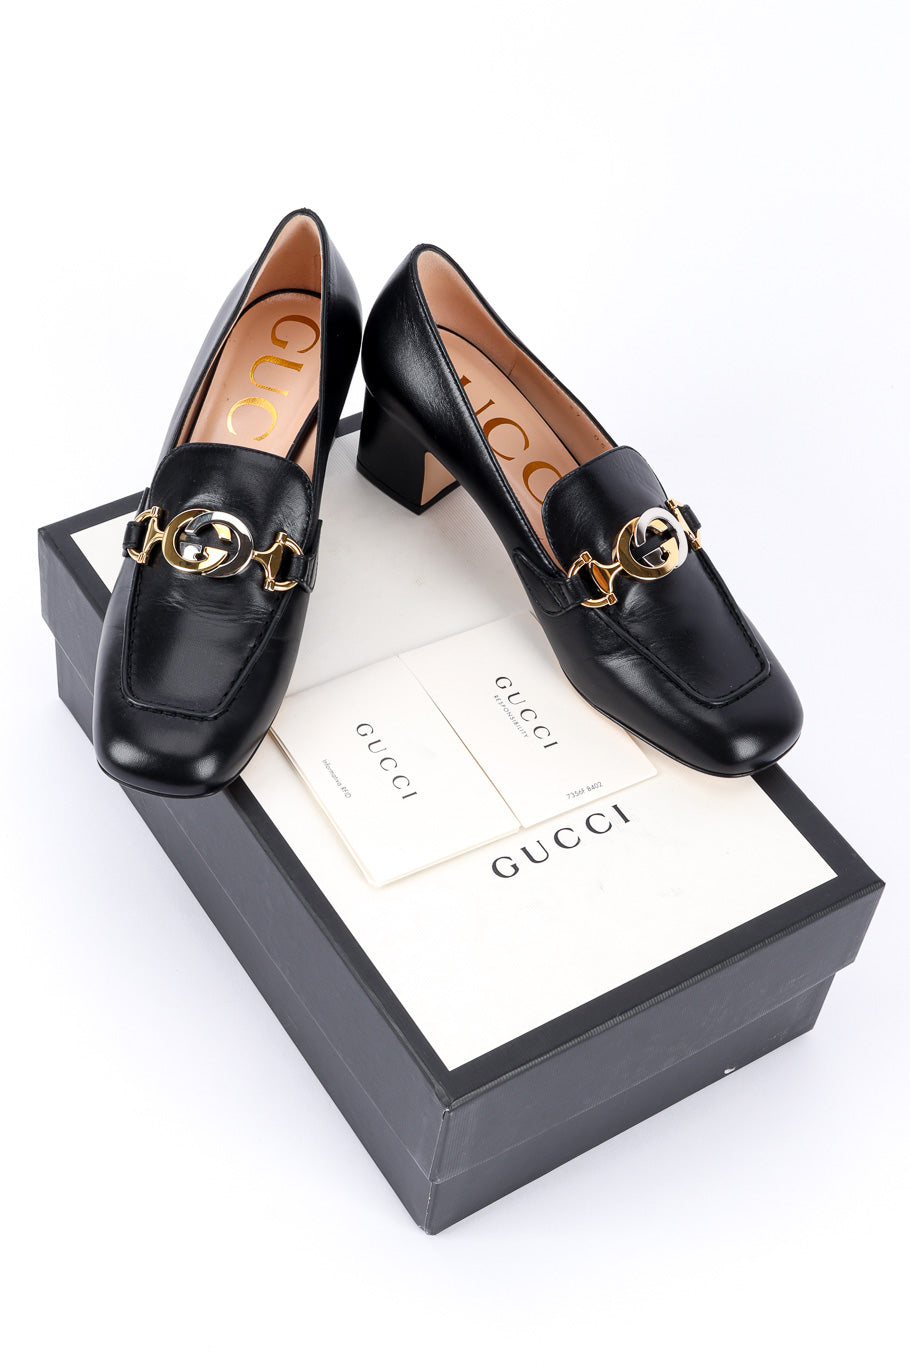 Horsebit loafers by Gucci on box on white background @recessla